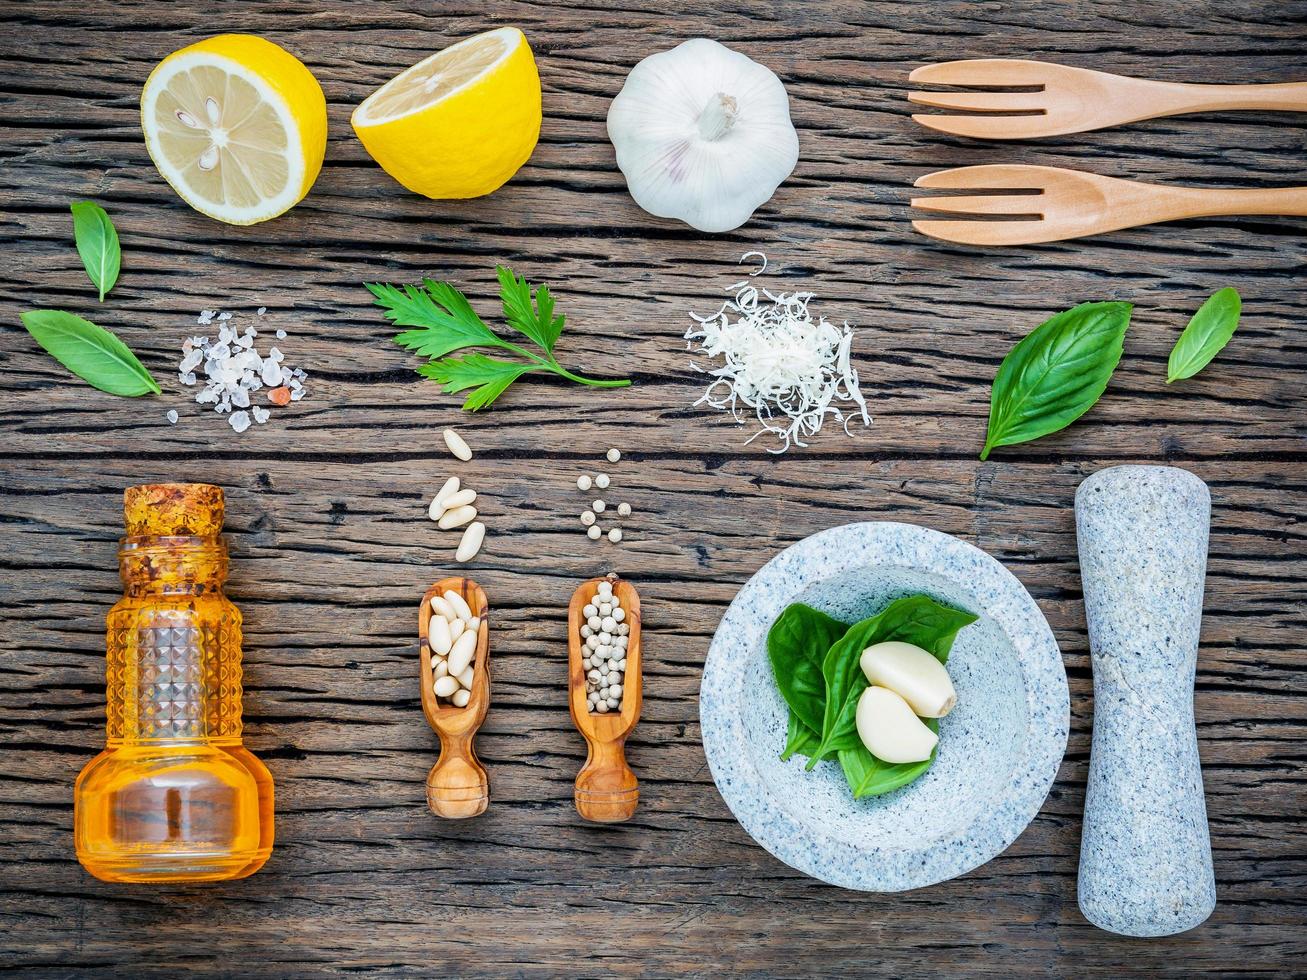 Ingredients for pesto on shabby wooden background photo